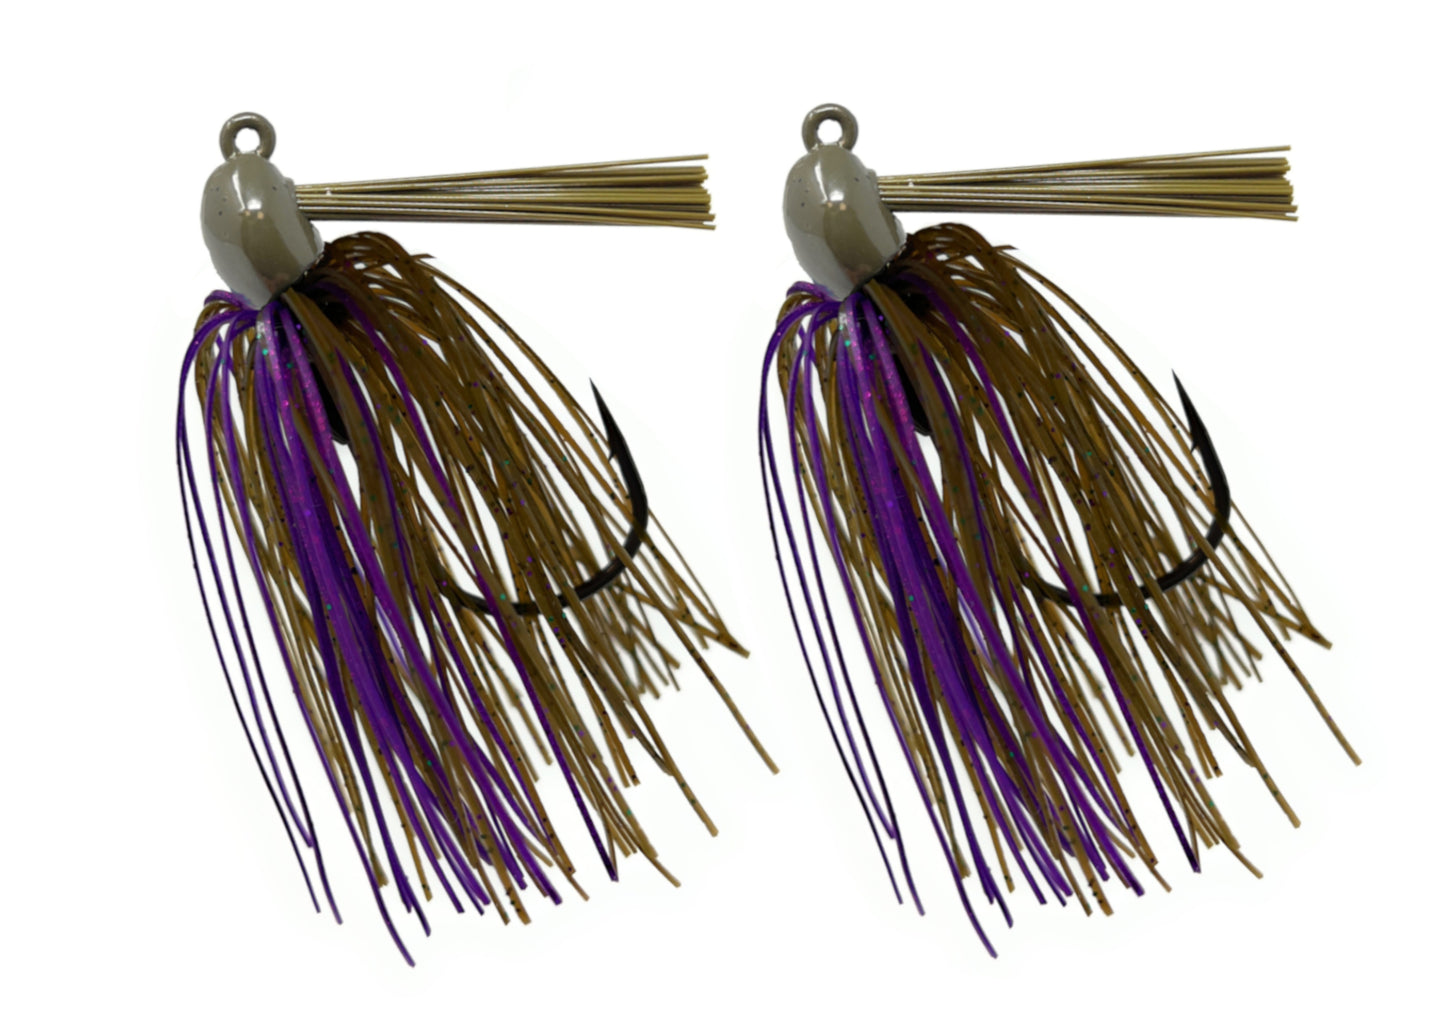  Reaction Tackle Tungsten Swim Jig for Bass Fishing